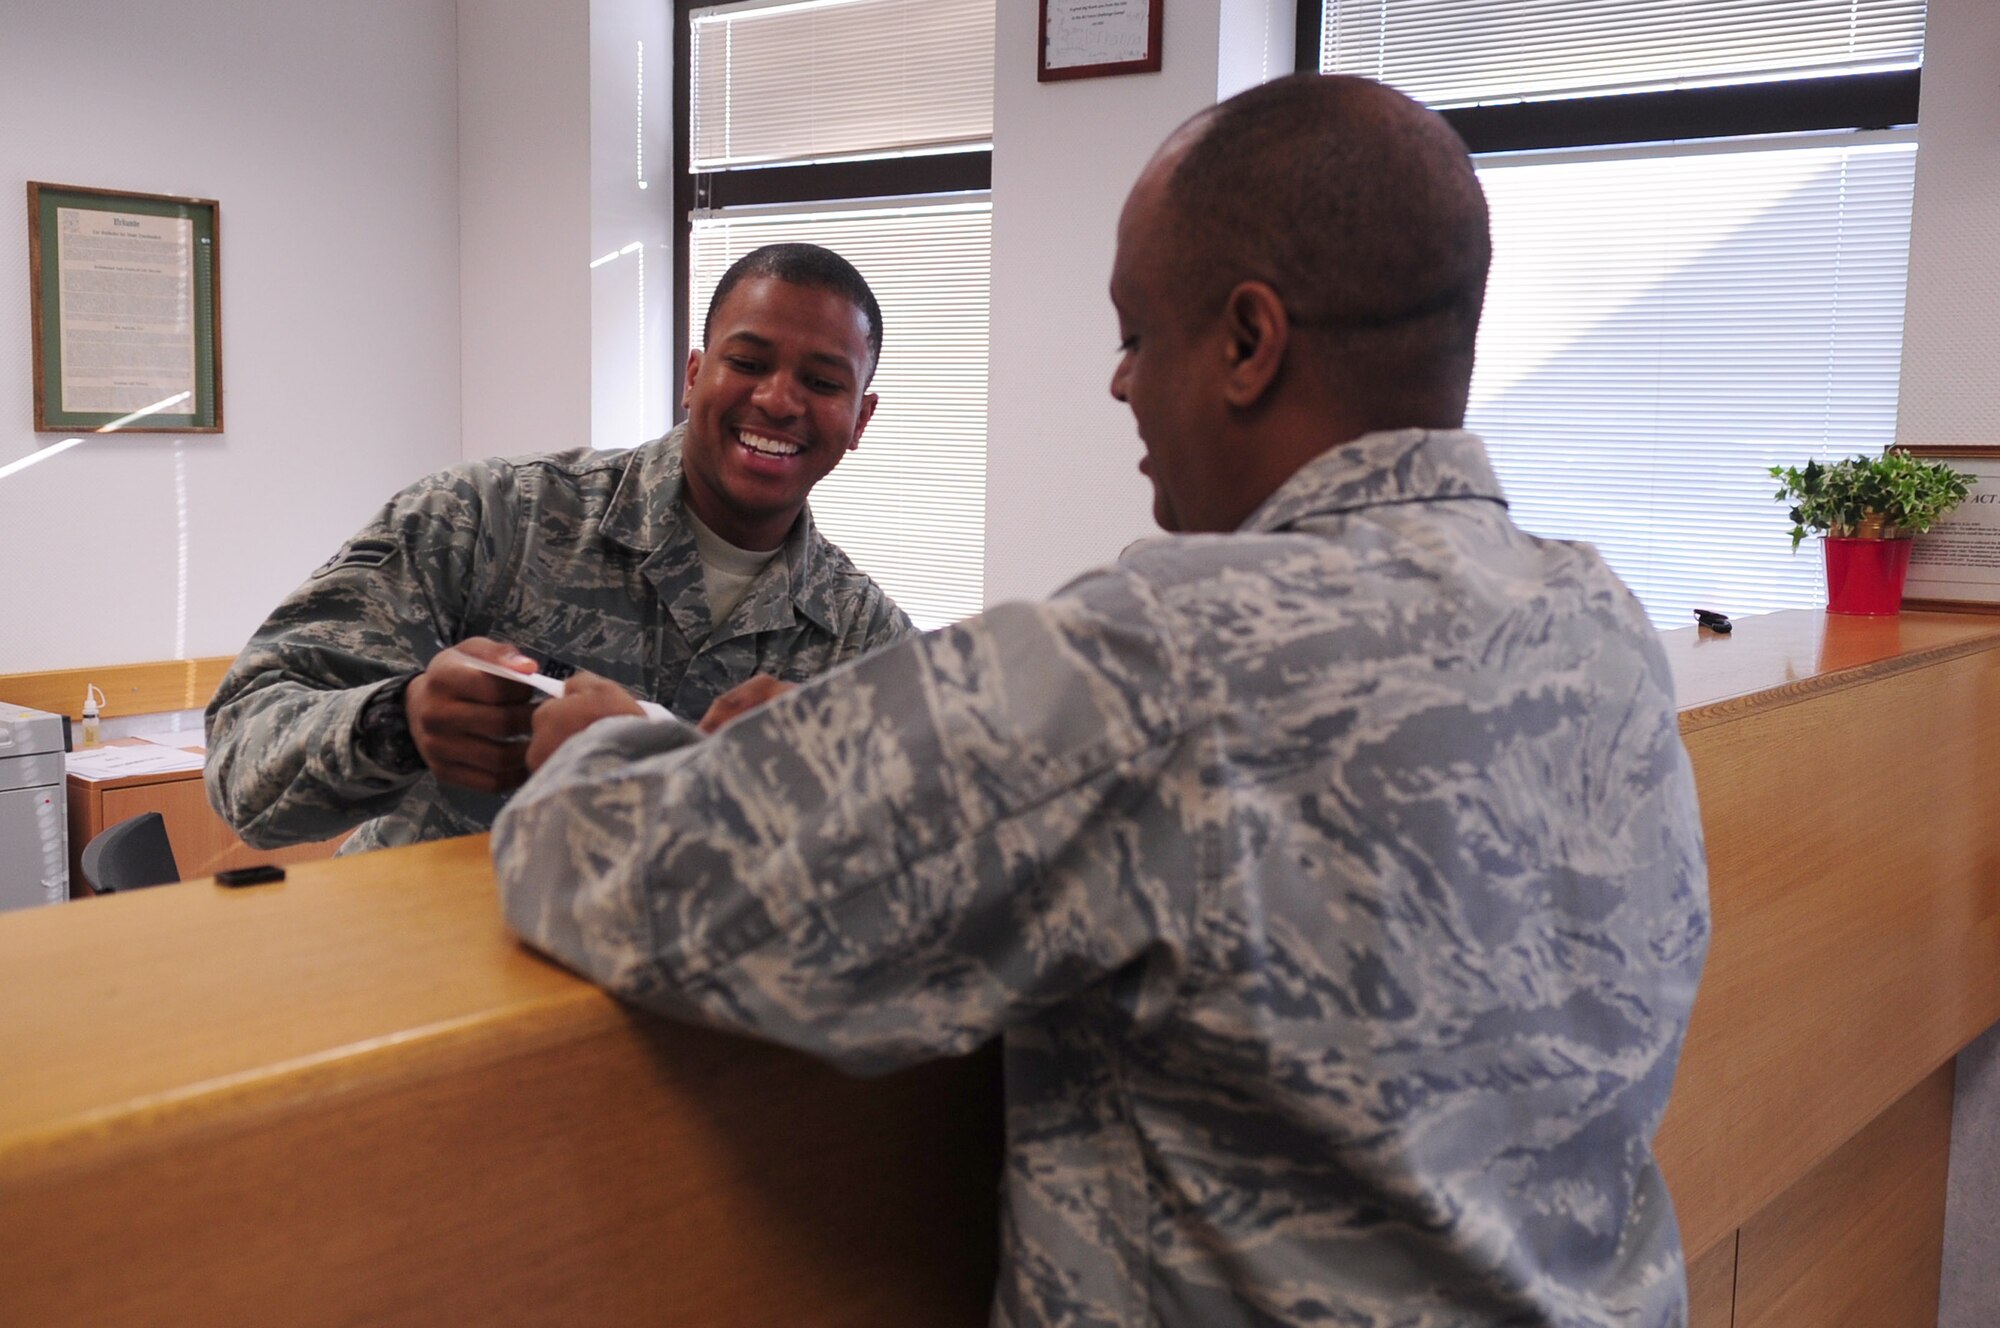 Airman 1st Class Chinua Belle, 86th Airlift Wing, assists a customer at the Law Center, Ramstein Air Base, Germany, March 20, 2012. Members at the Law Center strive to provide on-time, on-target legal advice and services to the Kaiserslautern Military Community. (U.S. Air Force photo by Senior Airman Brittany Perry)